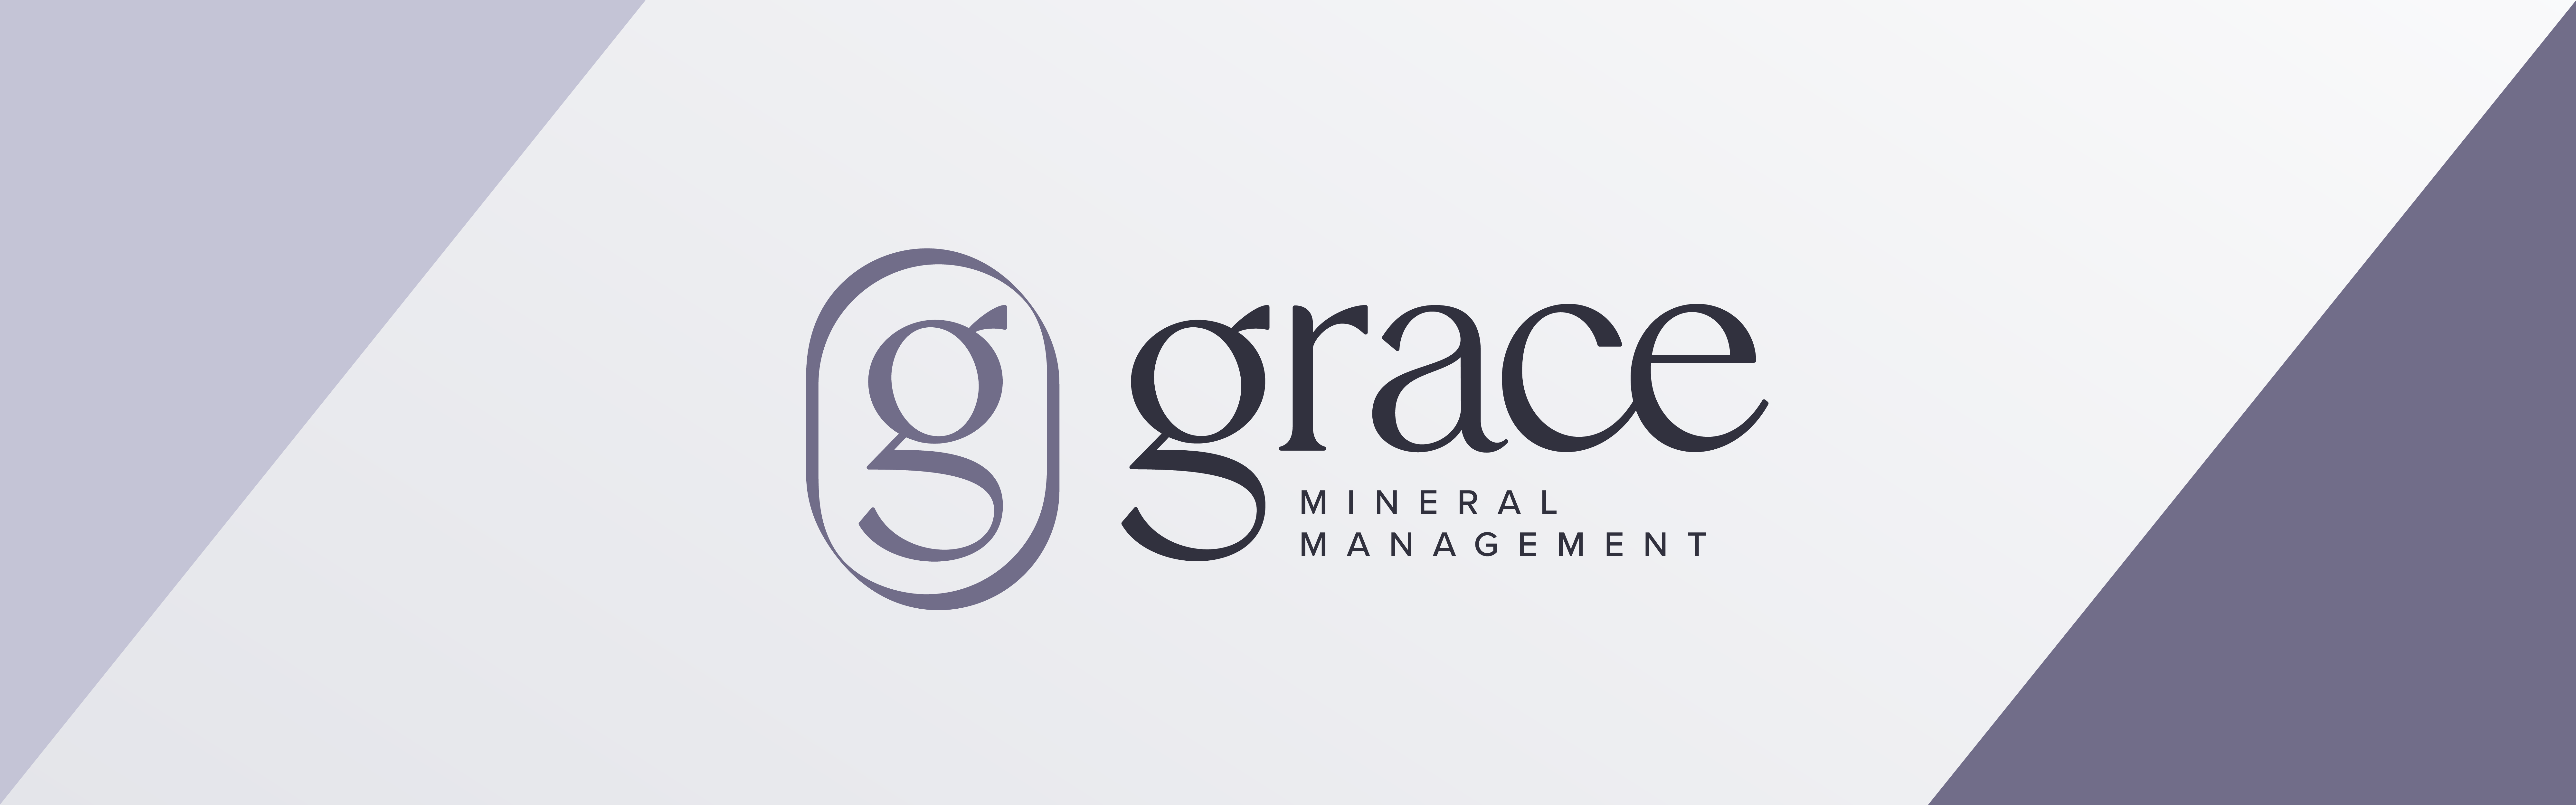 Grace Mineral Management company logo displayed on a white and purple background.